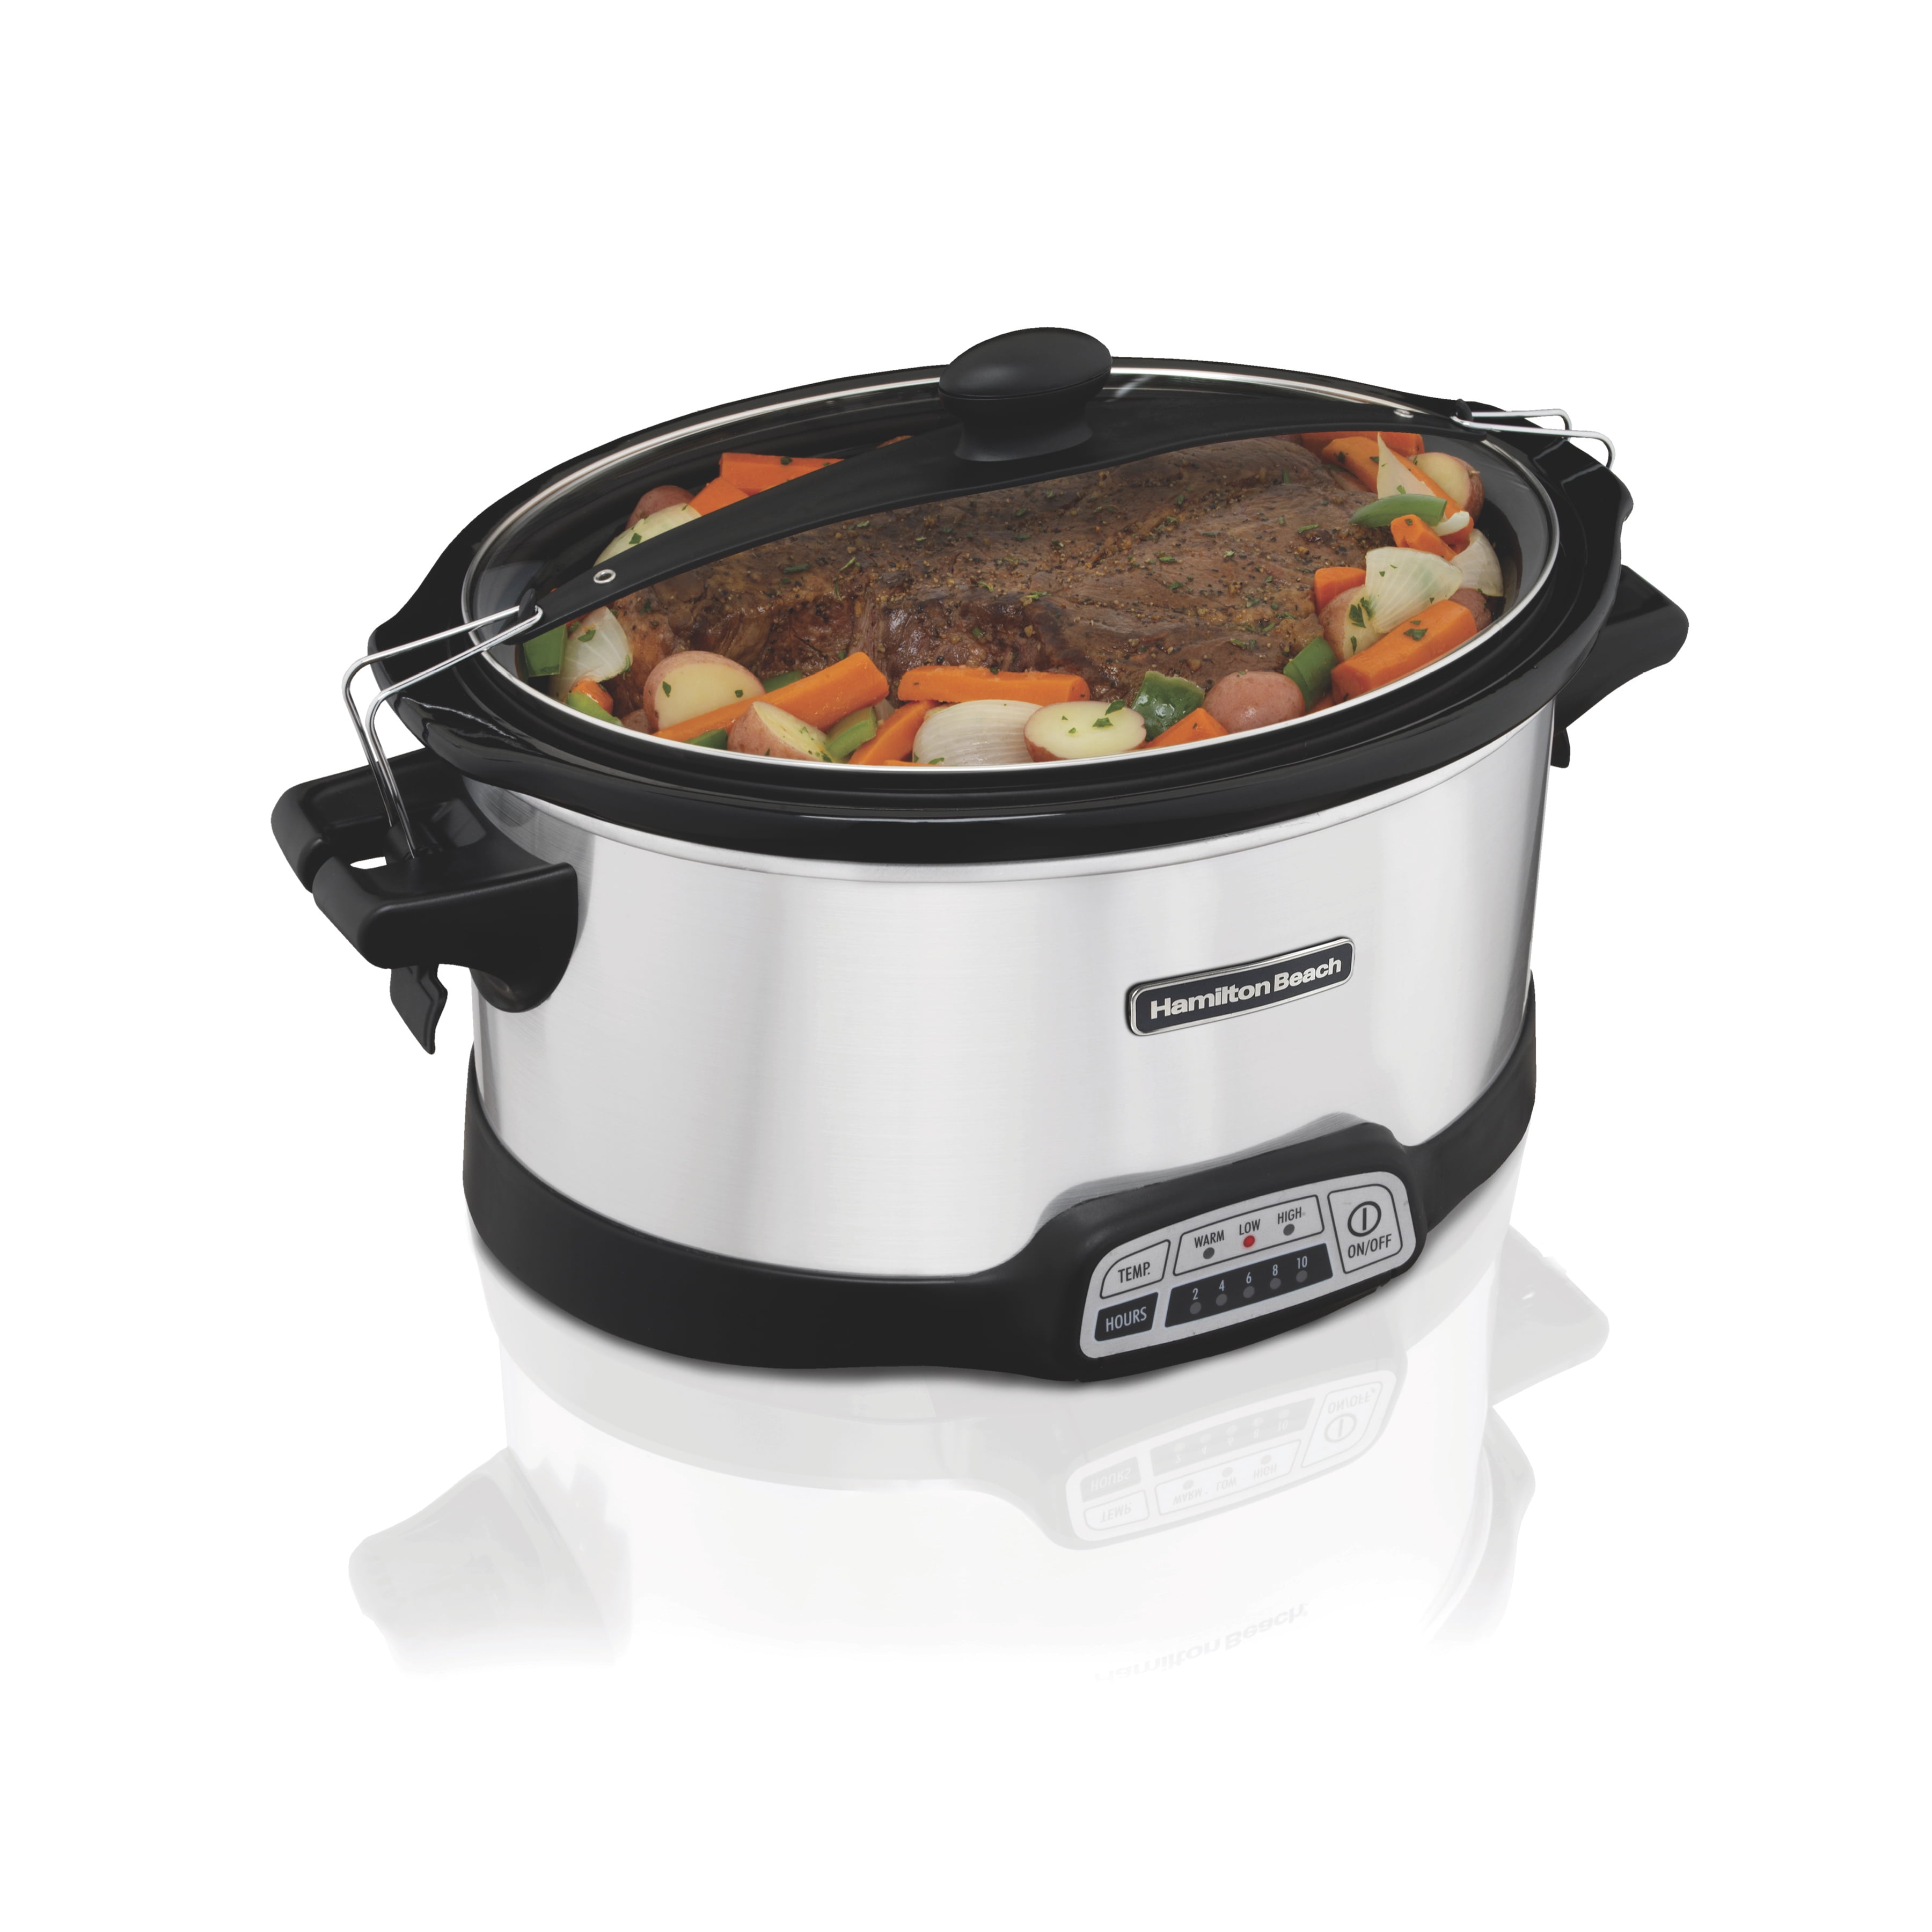 Hamilton Beach Programmable Slow Cooker, 7-Quart with Lid Latch